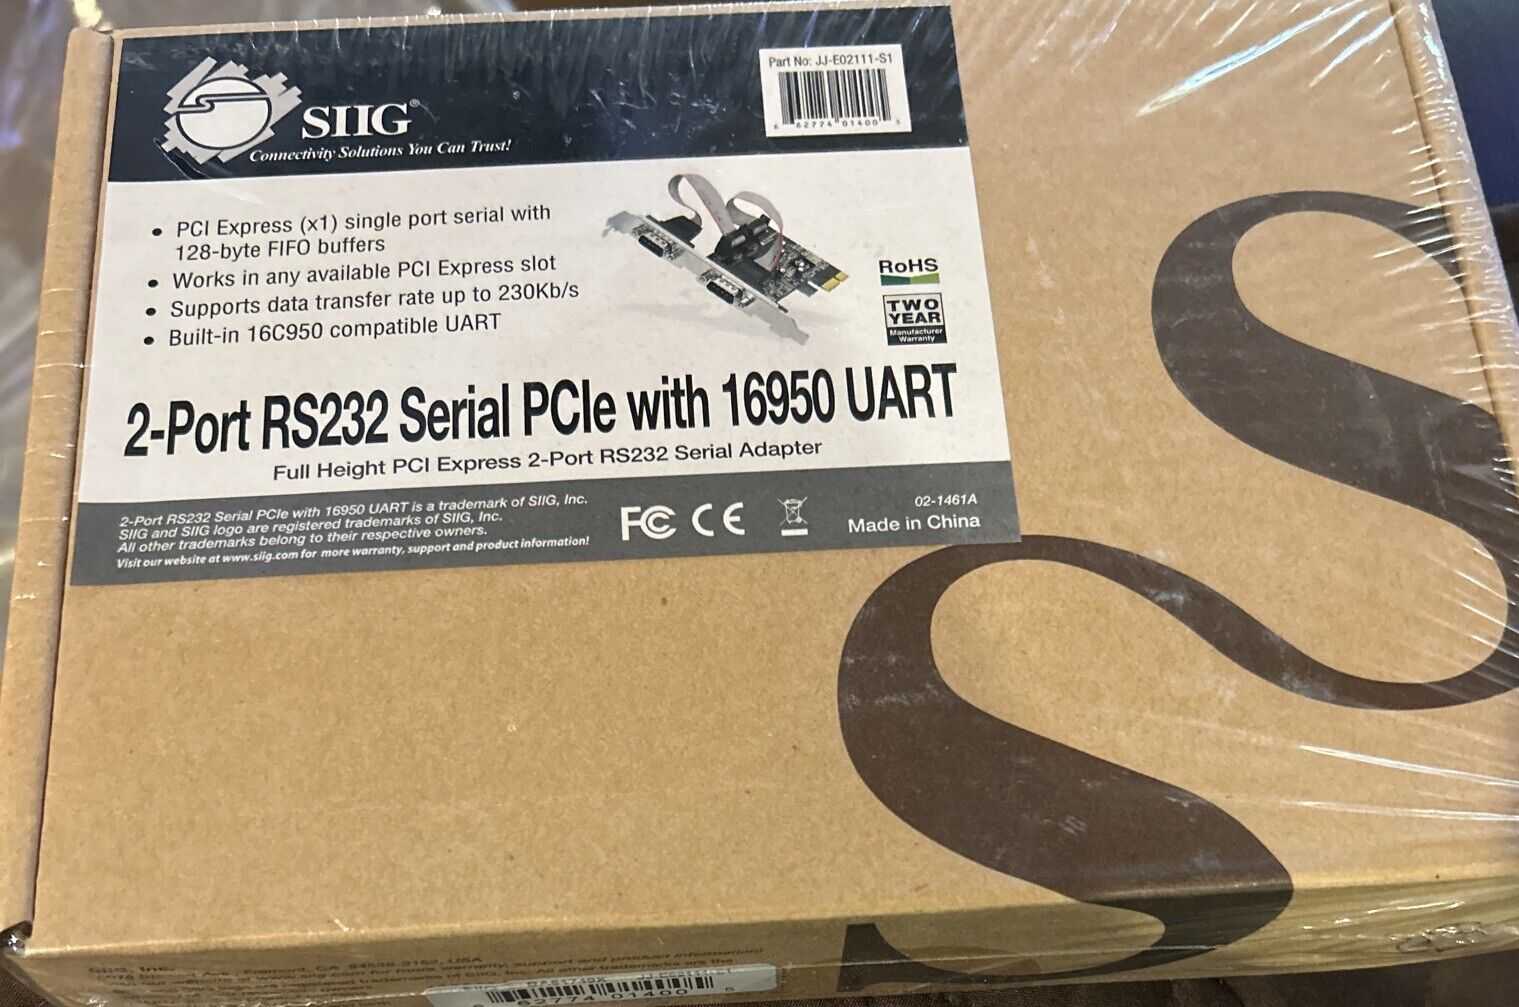 SIIG JJ-E02111-S1 Dual PCIe Serial Adapter 2 Port RS232 With 16950 UART -SEALED